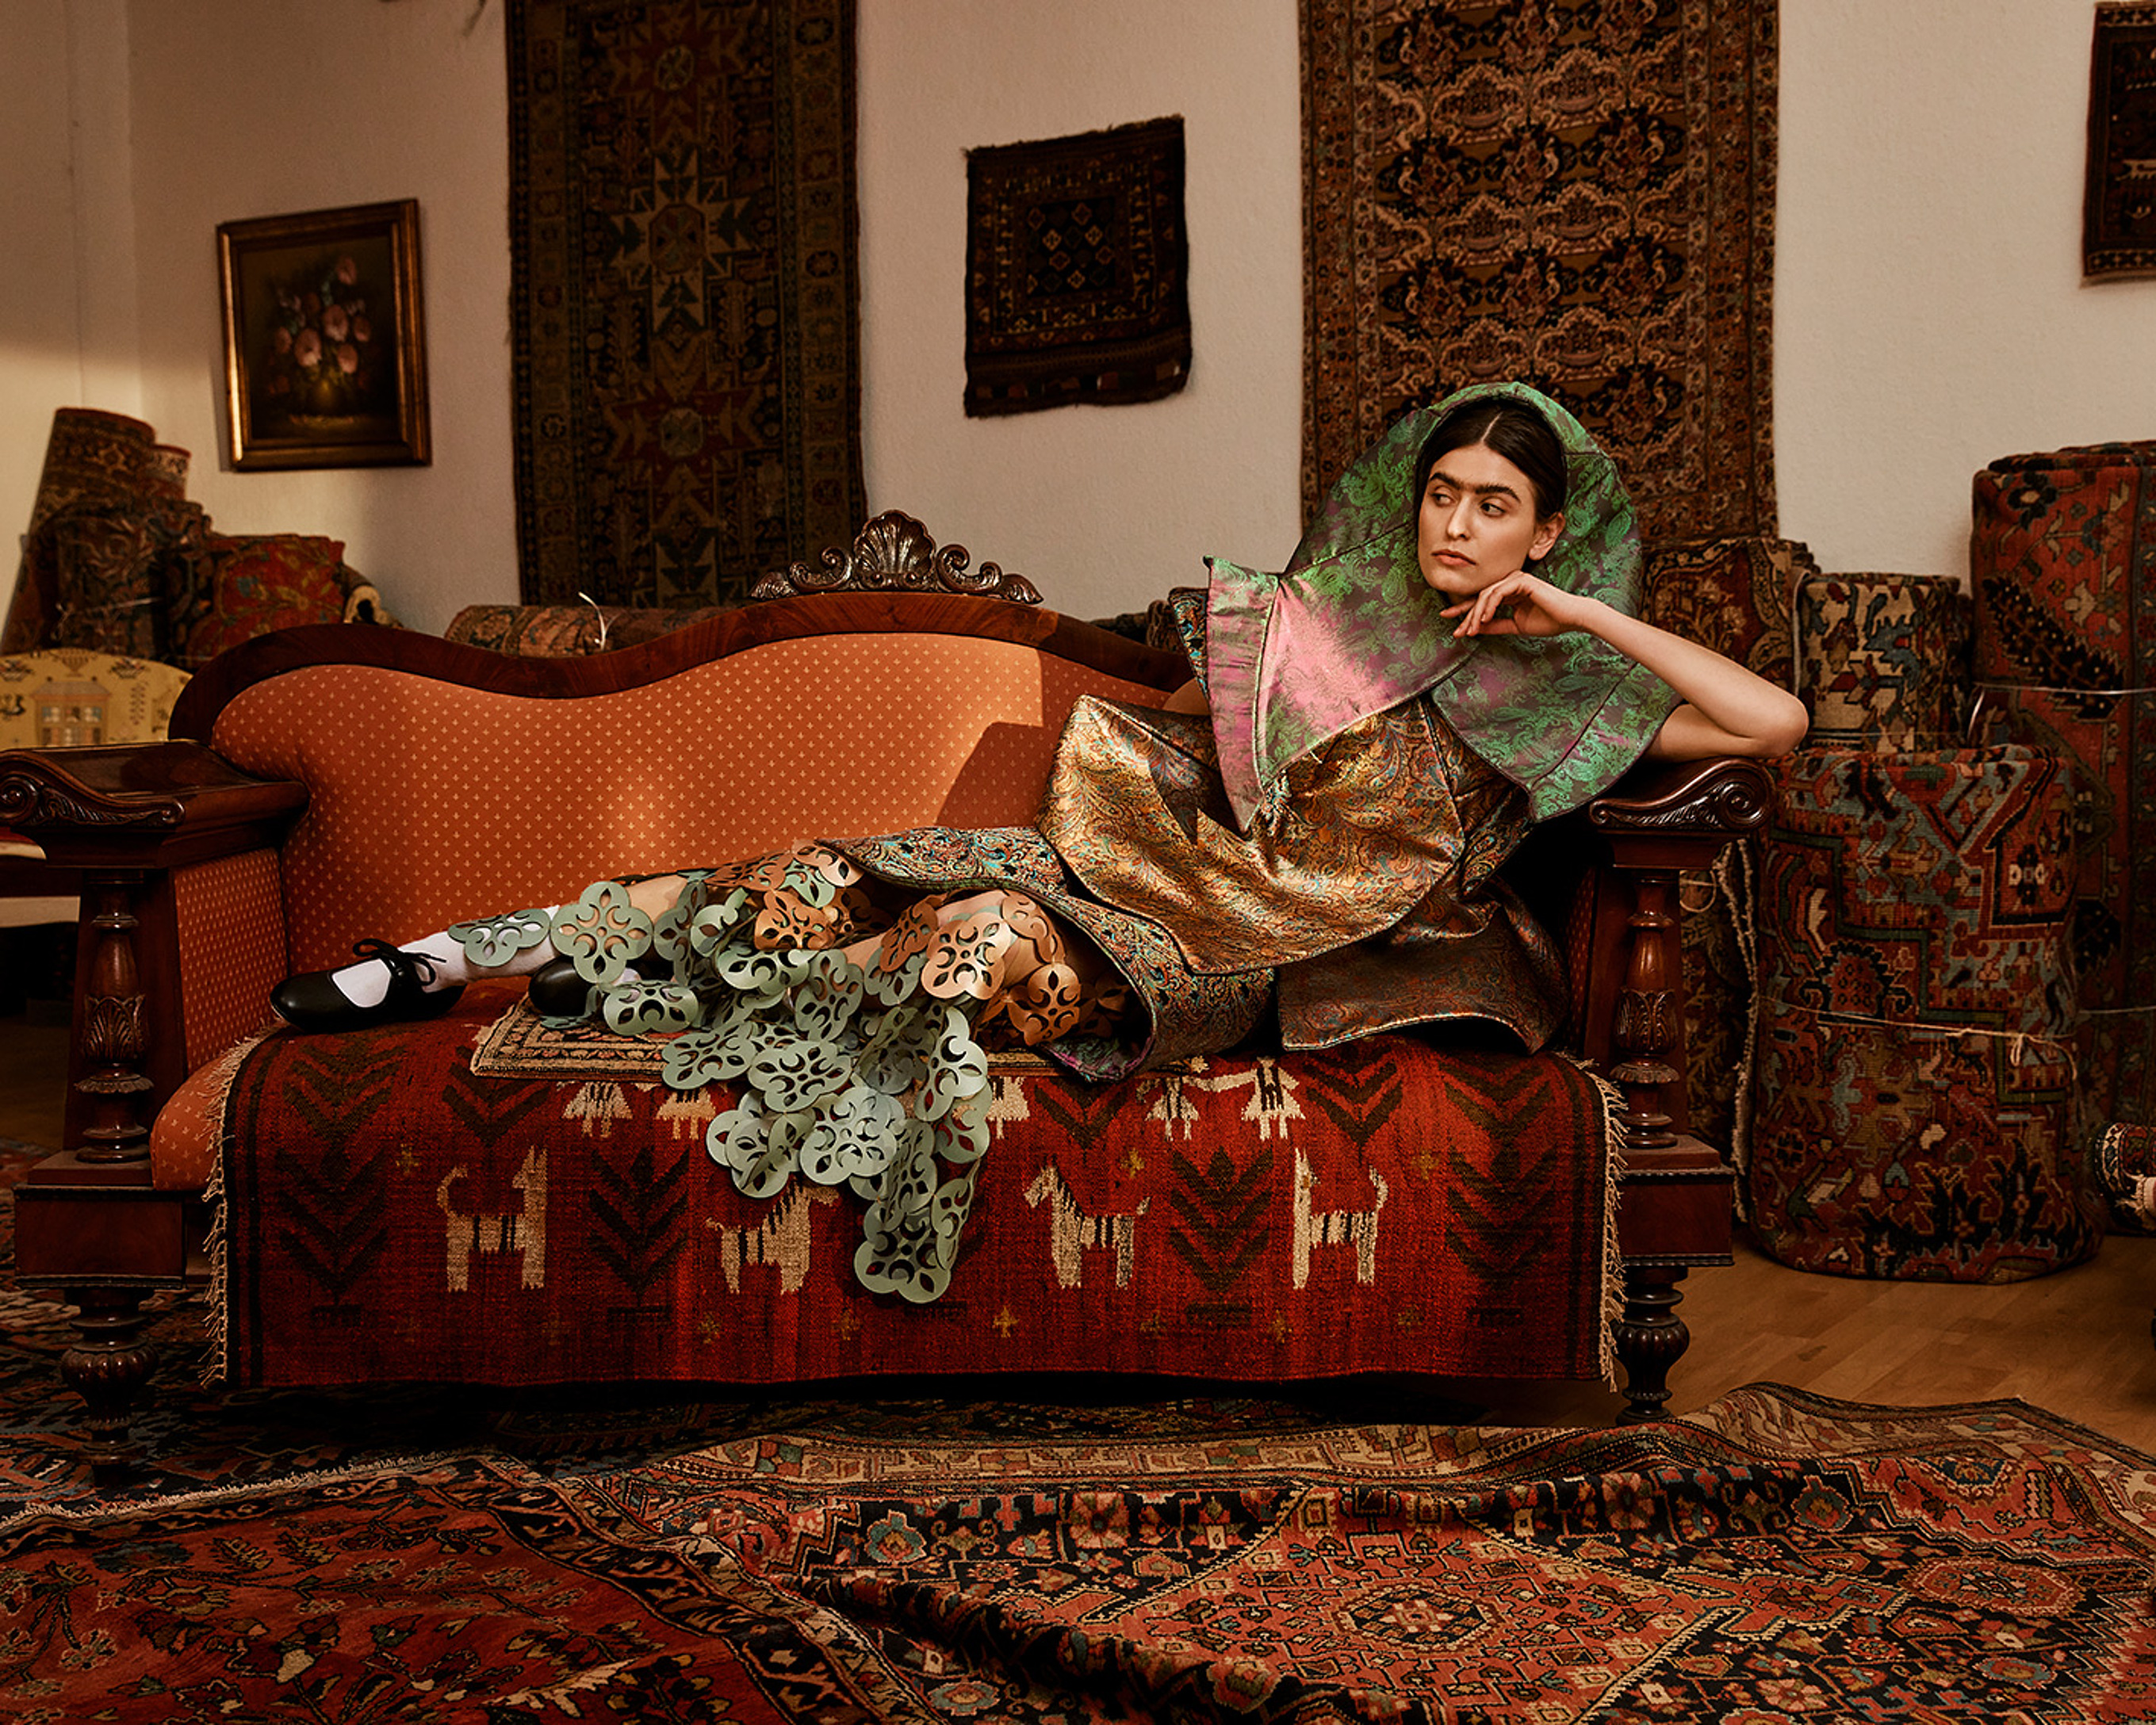 one model lie on a couch surrounded by carpets